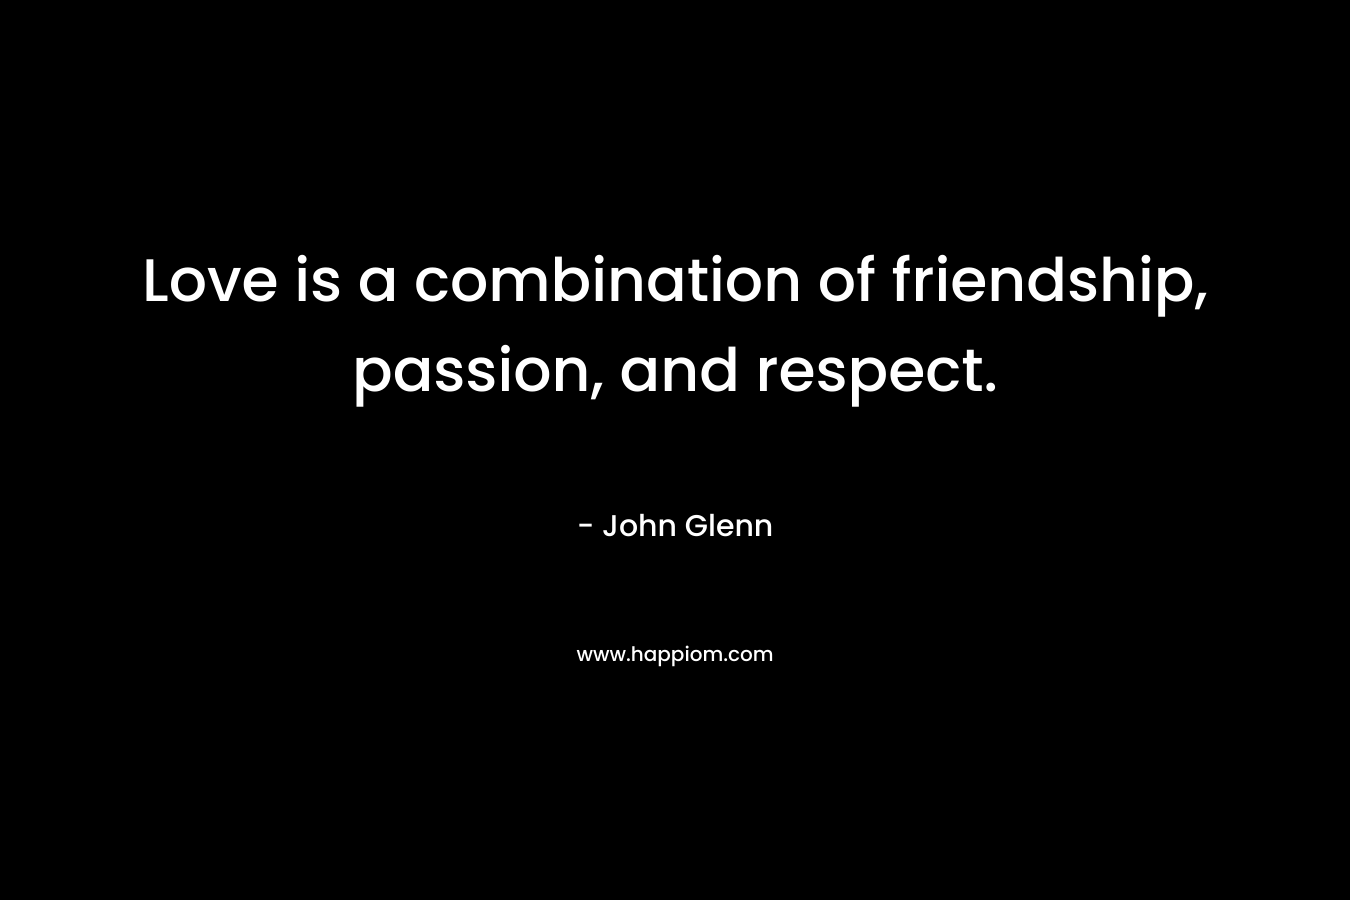 Love is a combination of friendship, passion, and respect. – John Glenn